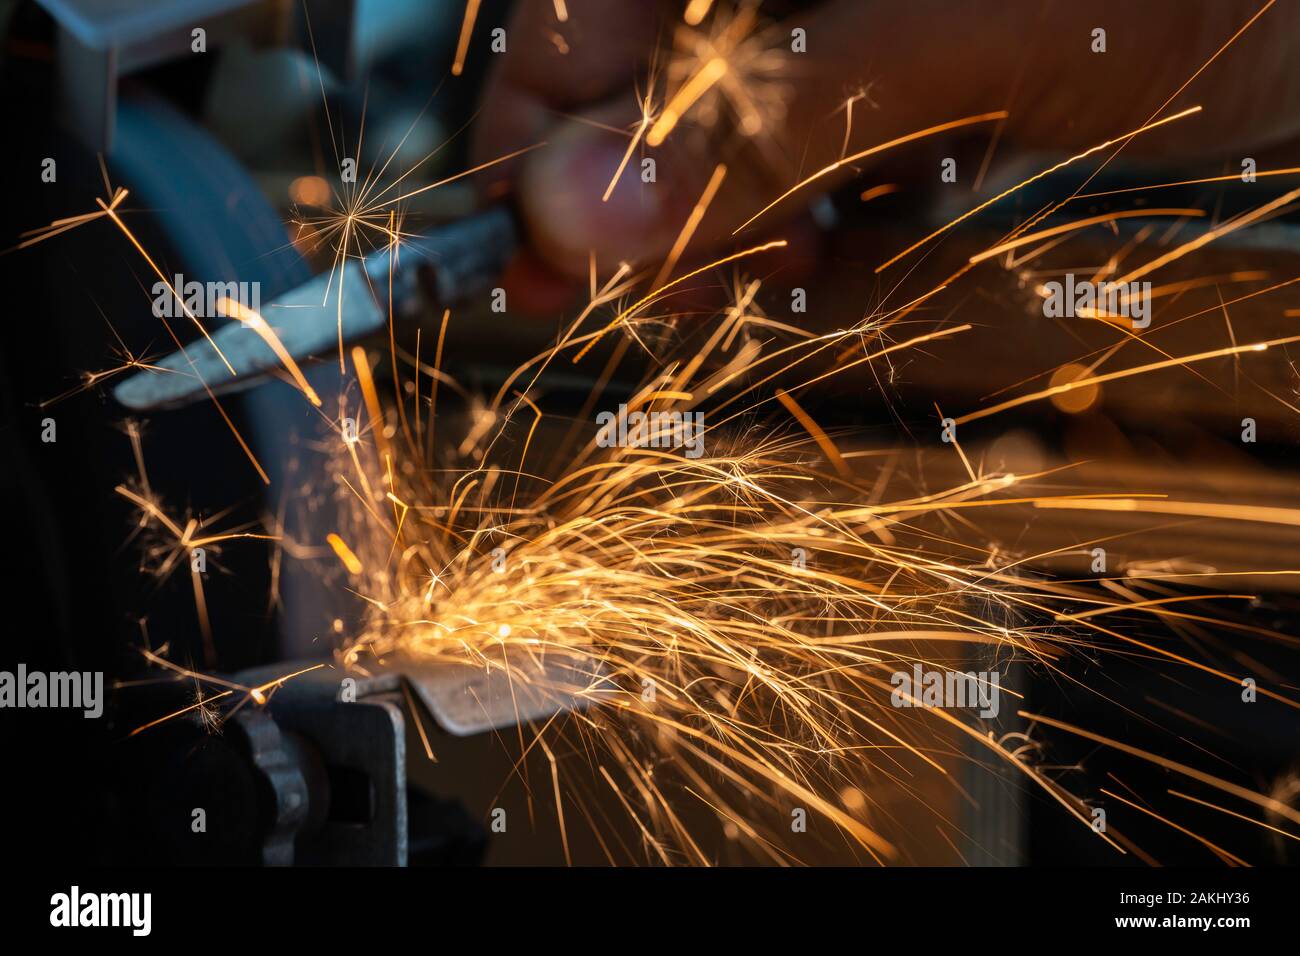 Sparks fly out of the grinder during use. A knife is sharpened on the grinder. Stock Photo